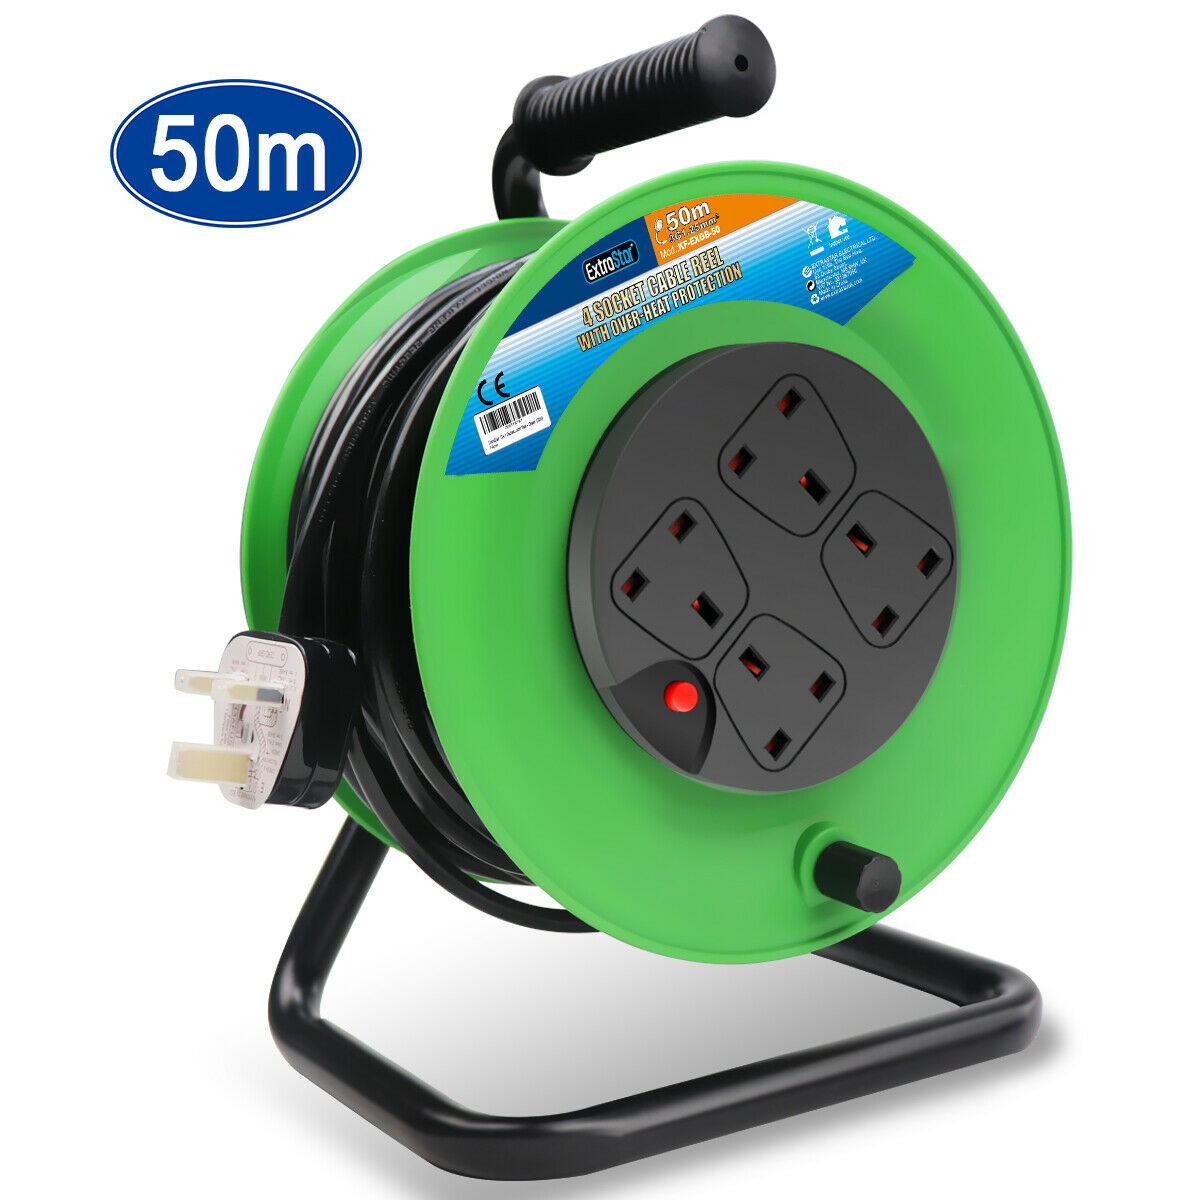 Heavy Duty 4 Gang Unswitched Cable Reel 50m - Green (KF-EXGB-50A